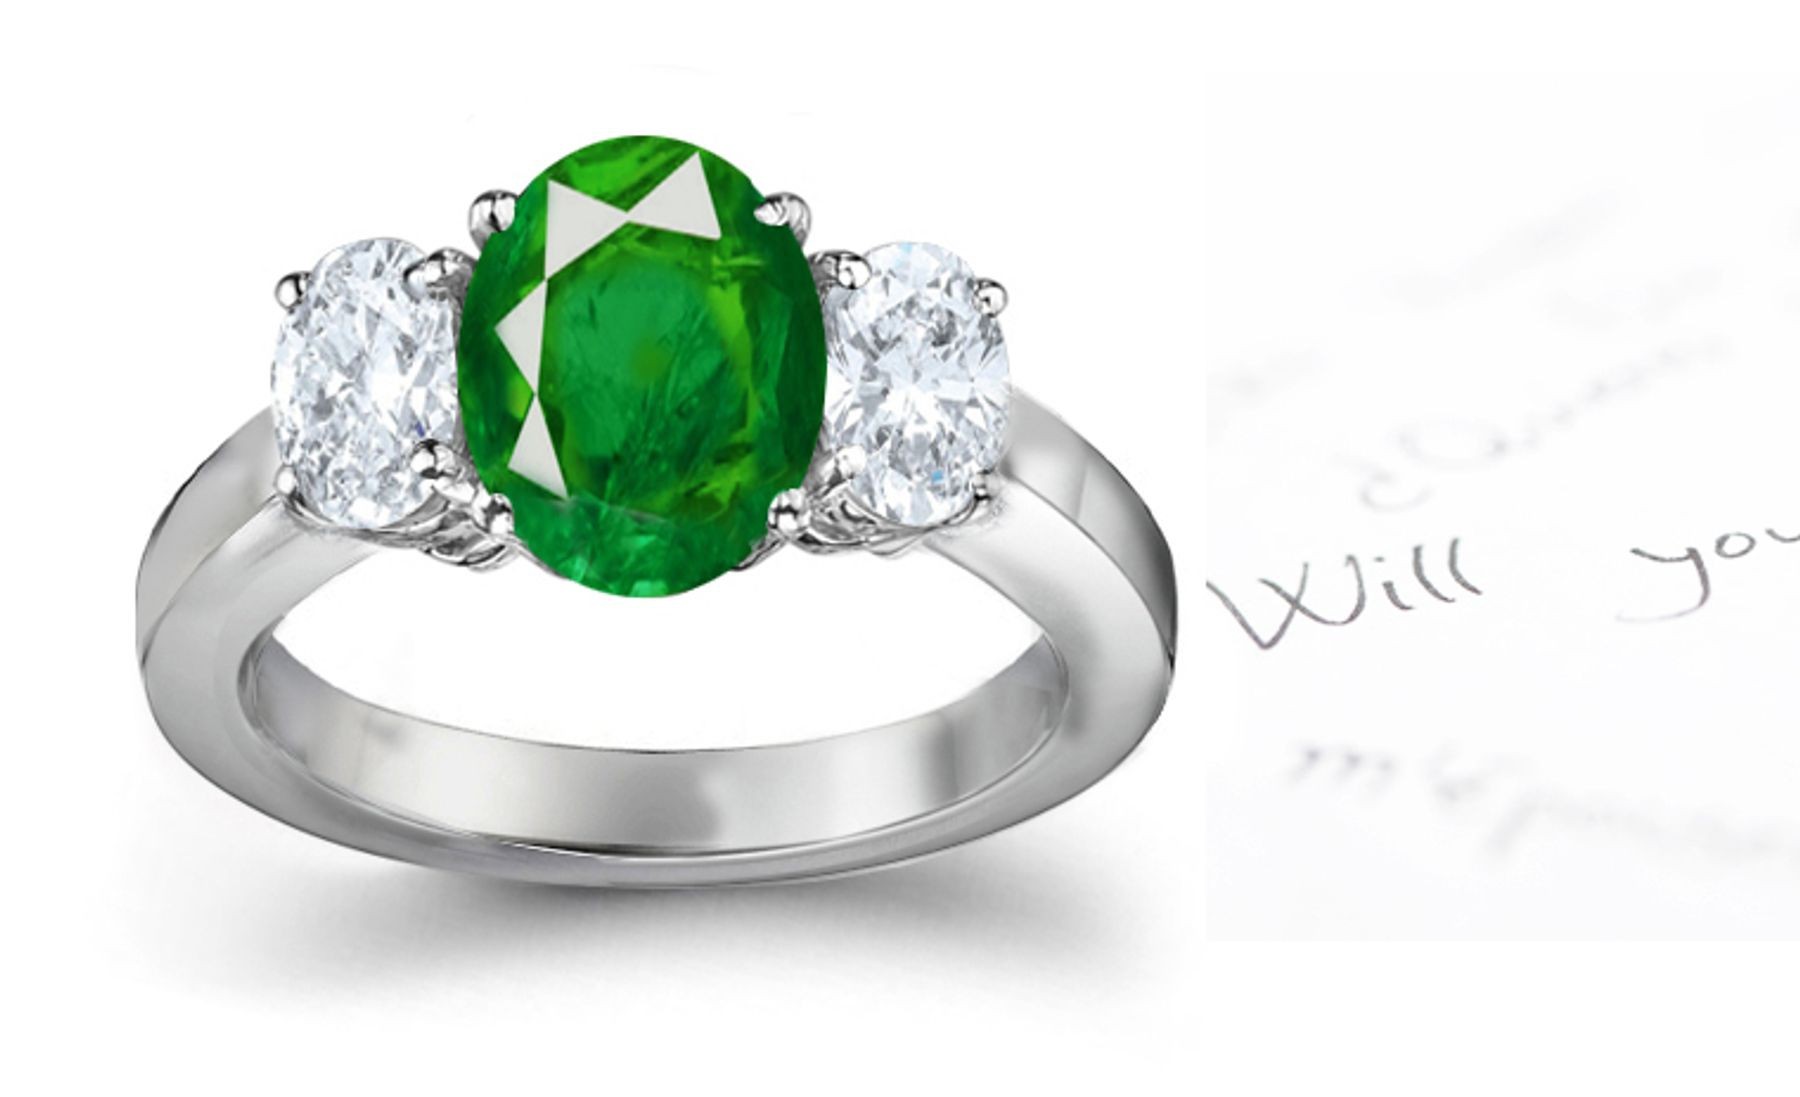 Classical Ovals: Really Classic 3 Stone Dark Tone Hue Bright Color Solid 14k Gold Oval Emerald & Oval Diamond Engagement Ring